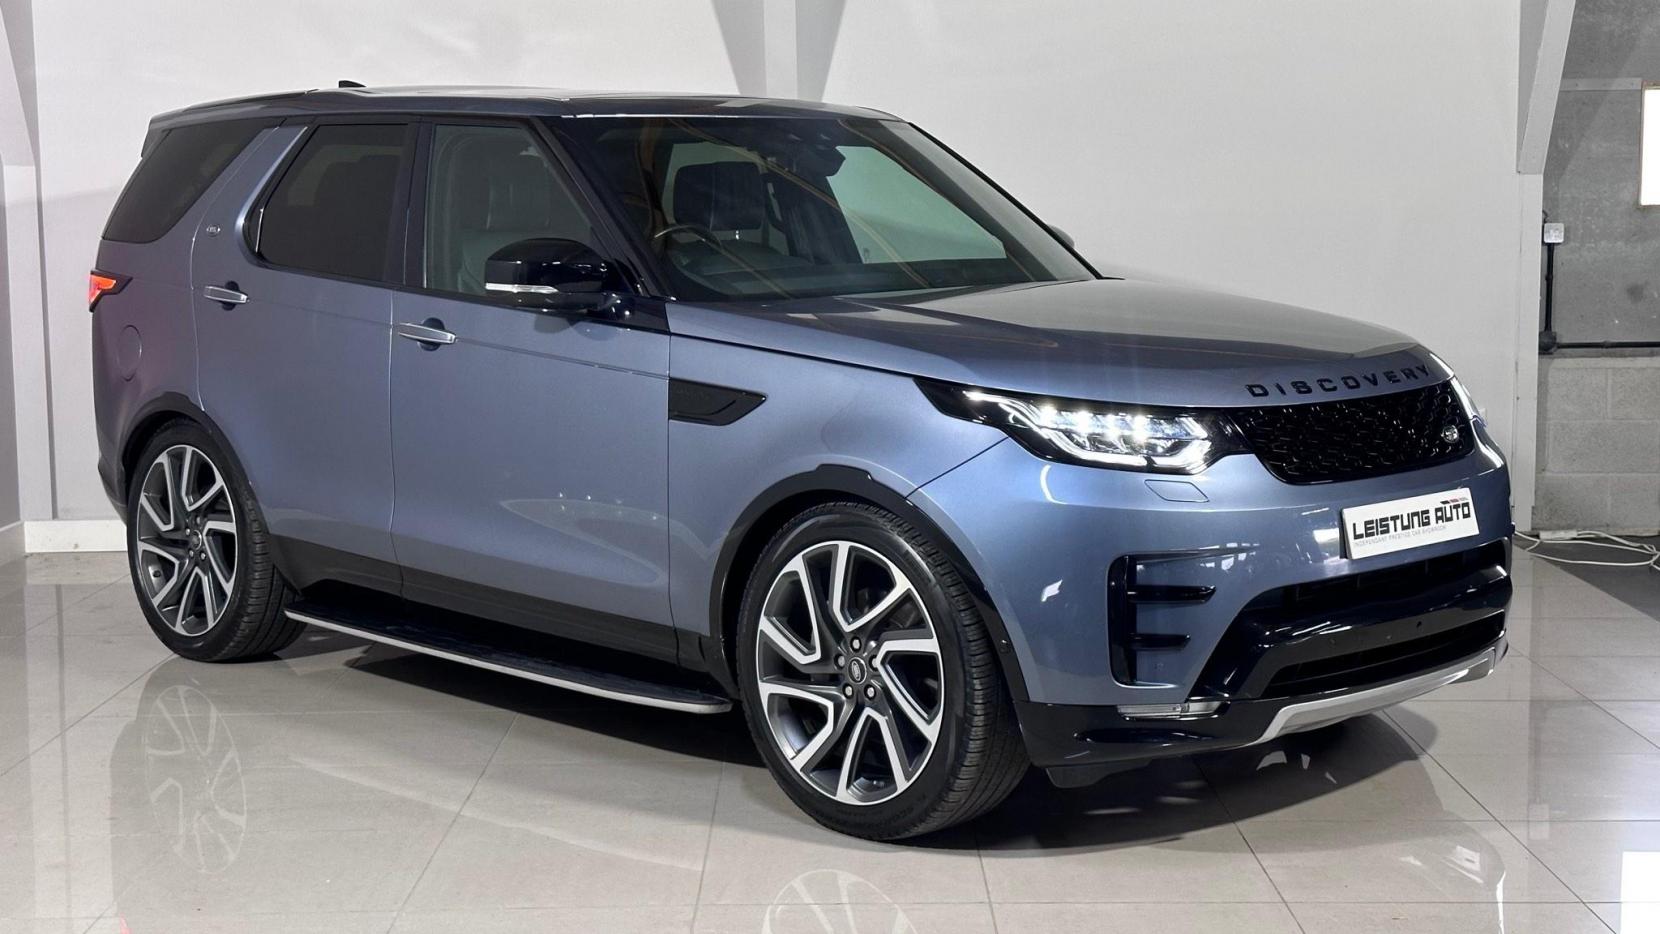 Land Rover Discovery 3.0 SD V6 HSE Luxury Auto 4WD Euro 6 (s/s) 5dr 7Seats